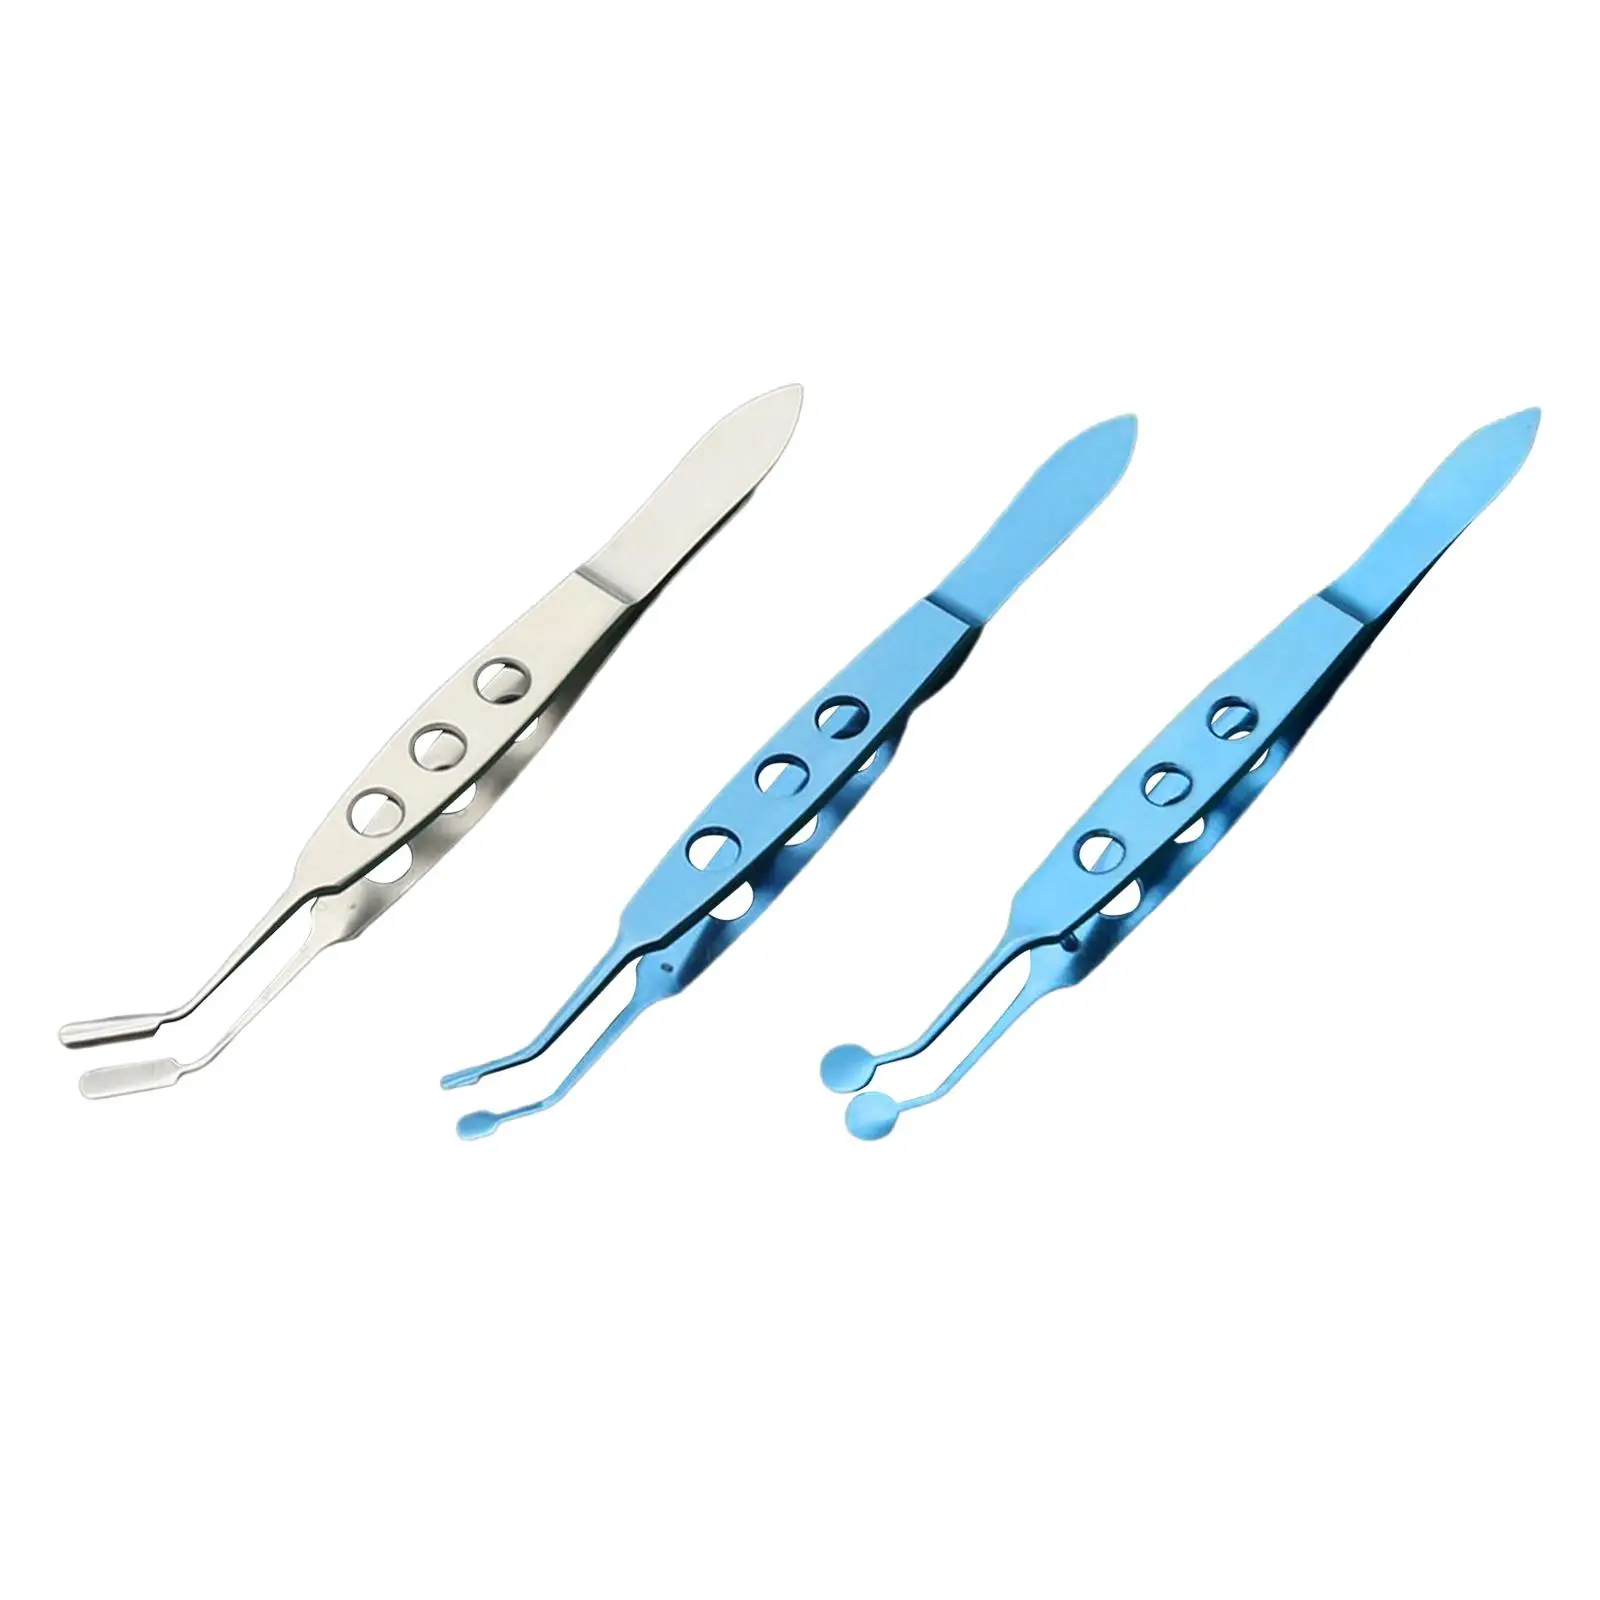 Meibomian Gland Forceps Tweezer Eye Tool High Precision Ophthalmic Clip for Meibomian Flap Palpebral Gland Massage